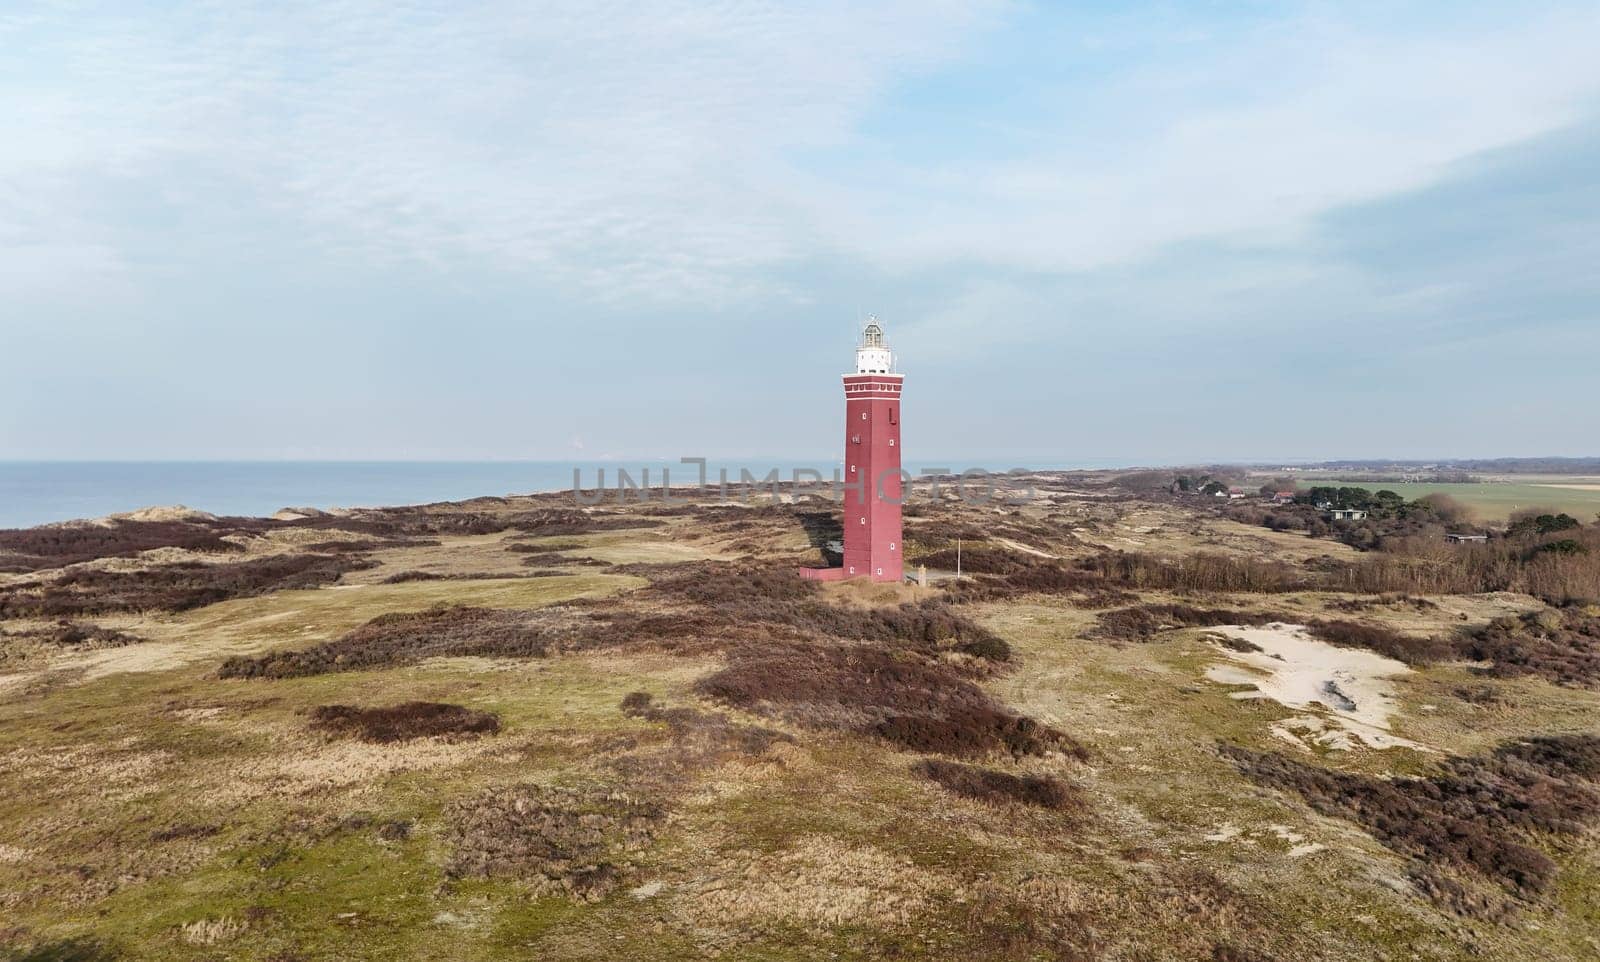 Drone picture of Ouddorp lighthouse in Holland with surrounding dunes in the netherlands